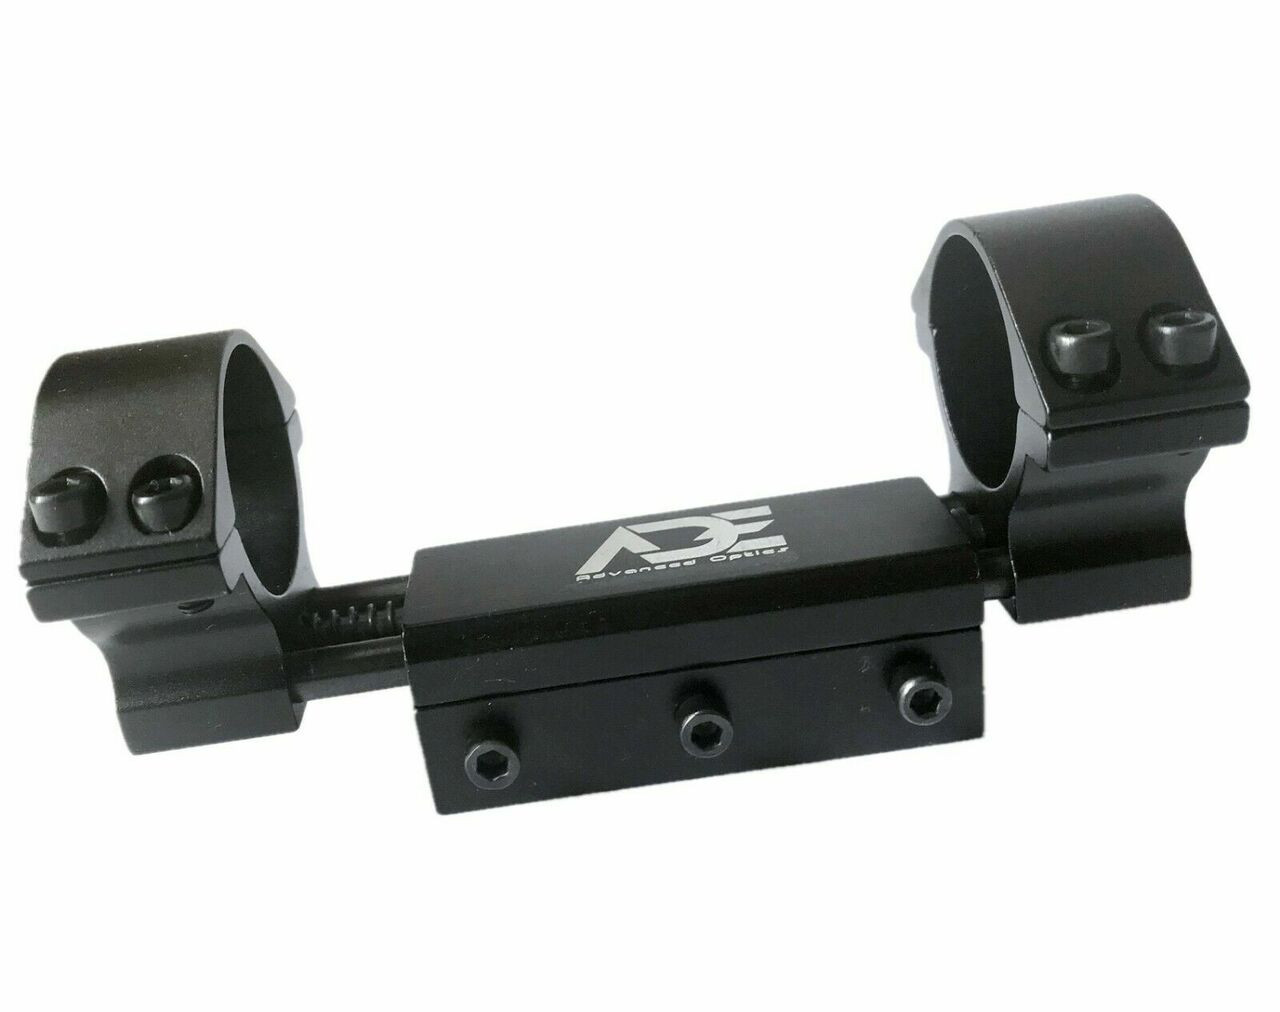 ADE High Profile Zero Recoil Mount, 25.4mm 30mm Rifle Scope Rings . Recoil Reduction Riflescope Mount